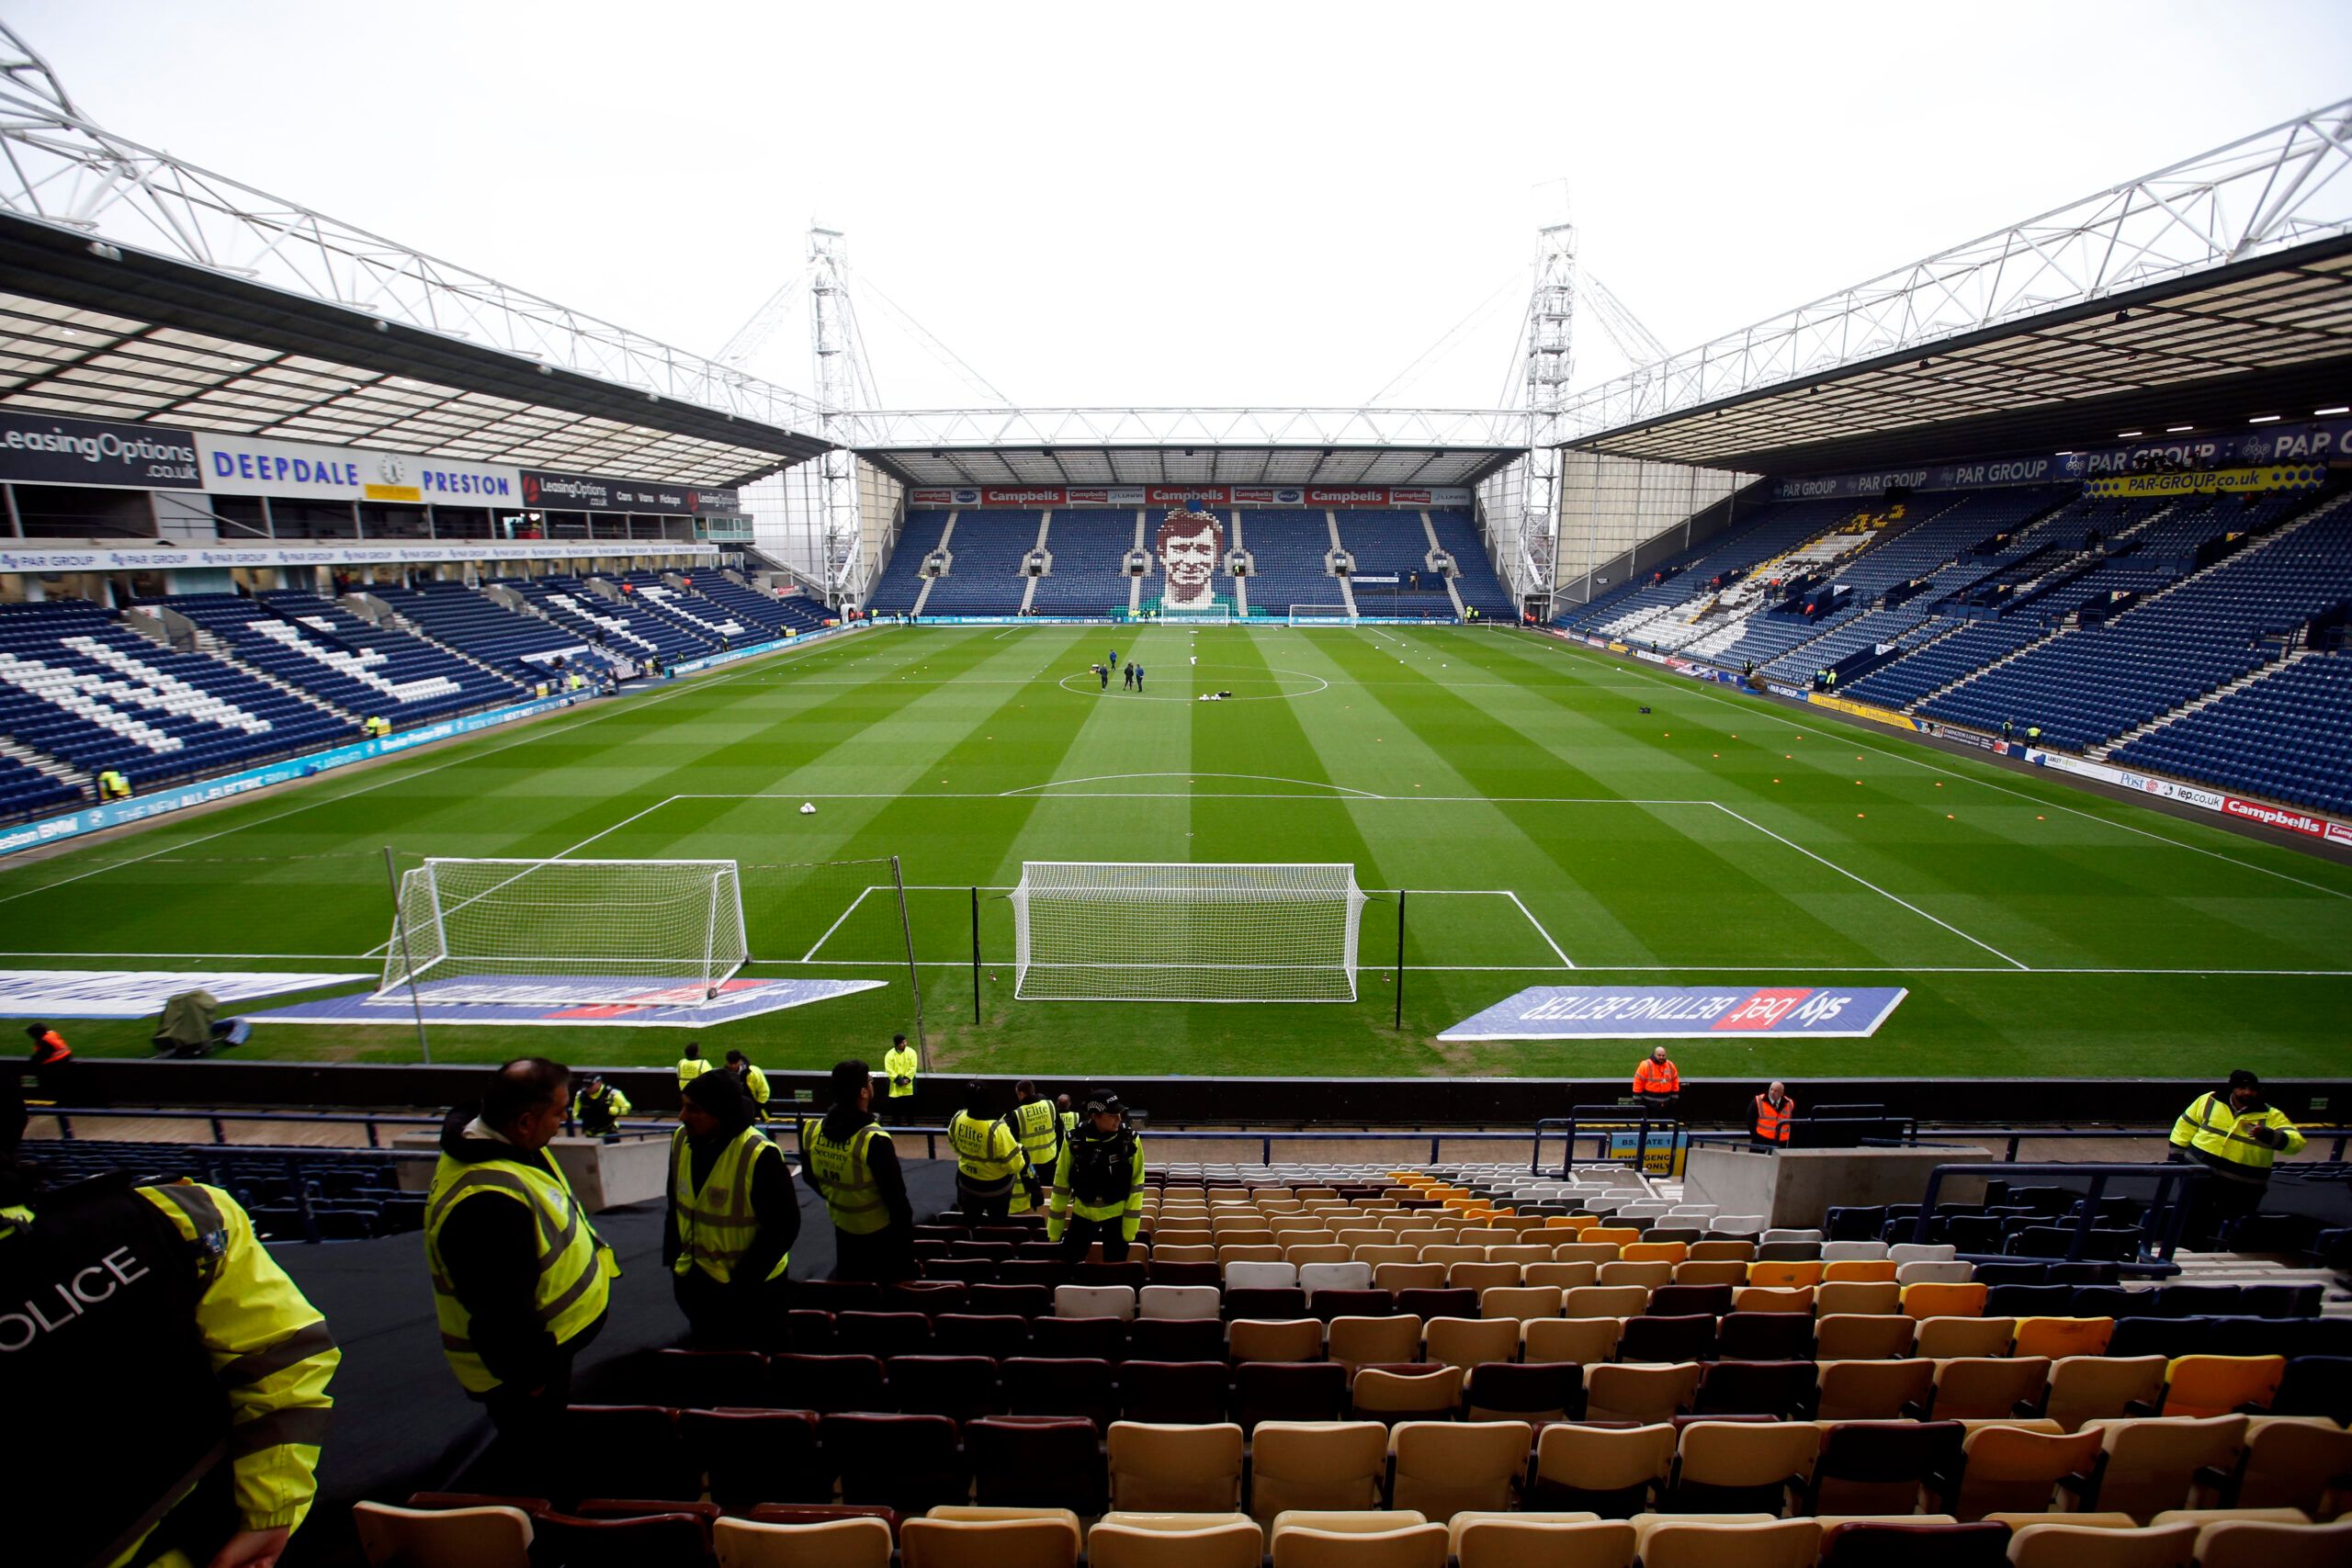 Soccer Football - Championship - Preston North End v Blackpool - Deepdale, Preston, Britain - April 5, 2022 General view inside the stadium before the match Action Images/Ed Sykes EDITORIAL USE ONLY. No use with unauthorized audio, video, data, fixture lists, club/league logos or 'live' services. Online in-match use limited to 75 images, no video emulation. No use in betting, games or single club /league/player publications.  Please contact your account representative for further details.